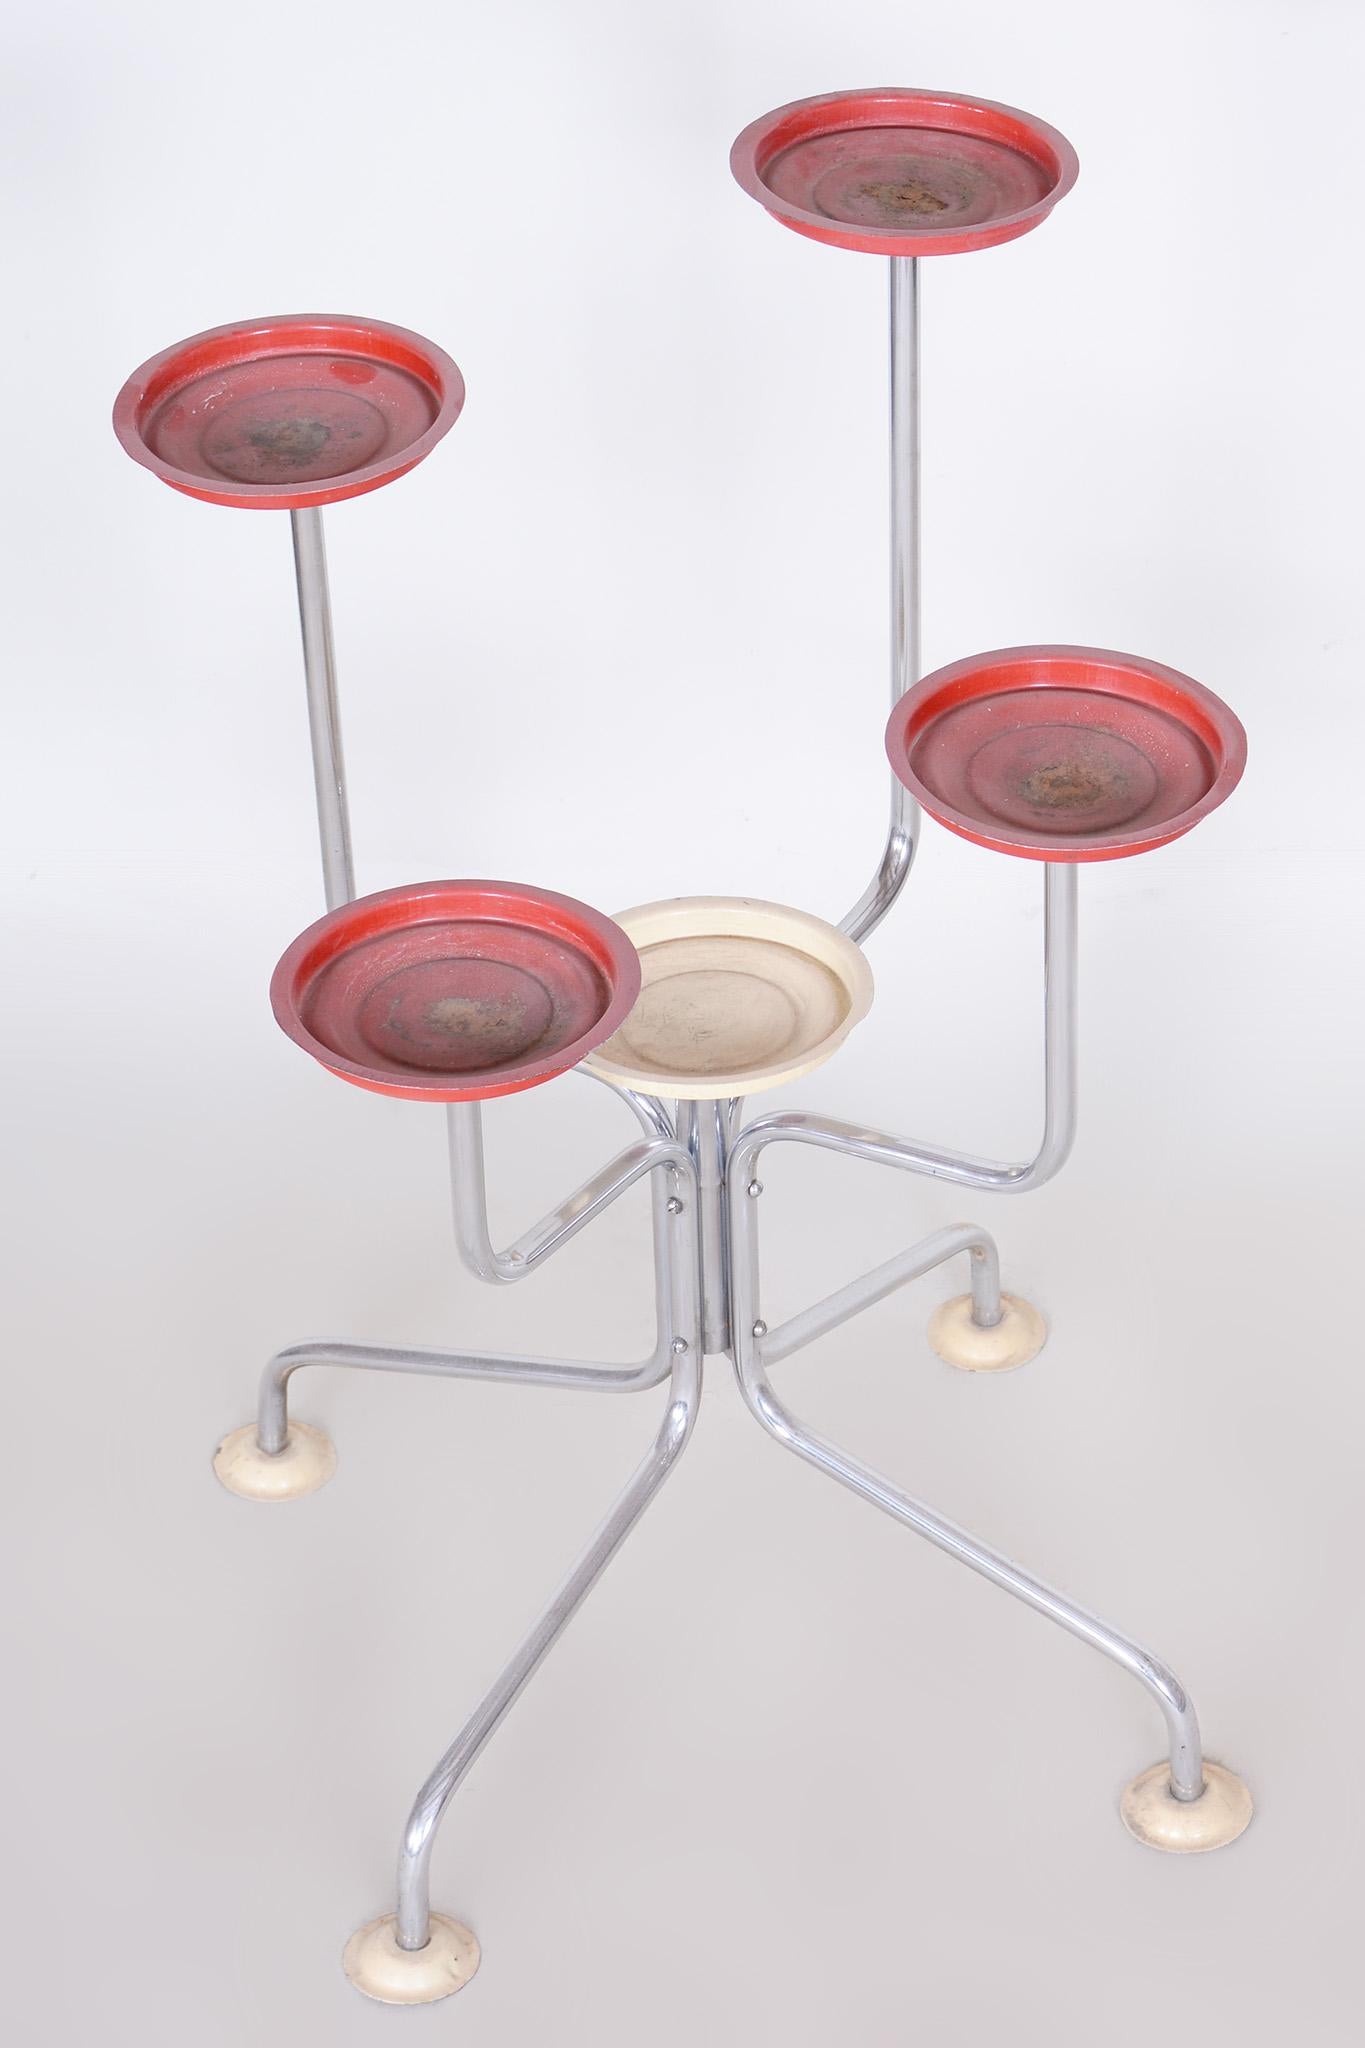 Czech Bauhaus Flower Stand Made of Chrome Plated Steel, Stable, 1930s For Sale 2